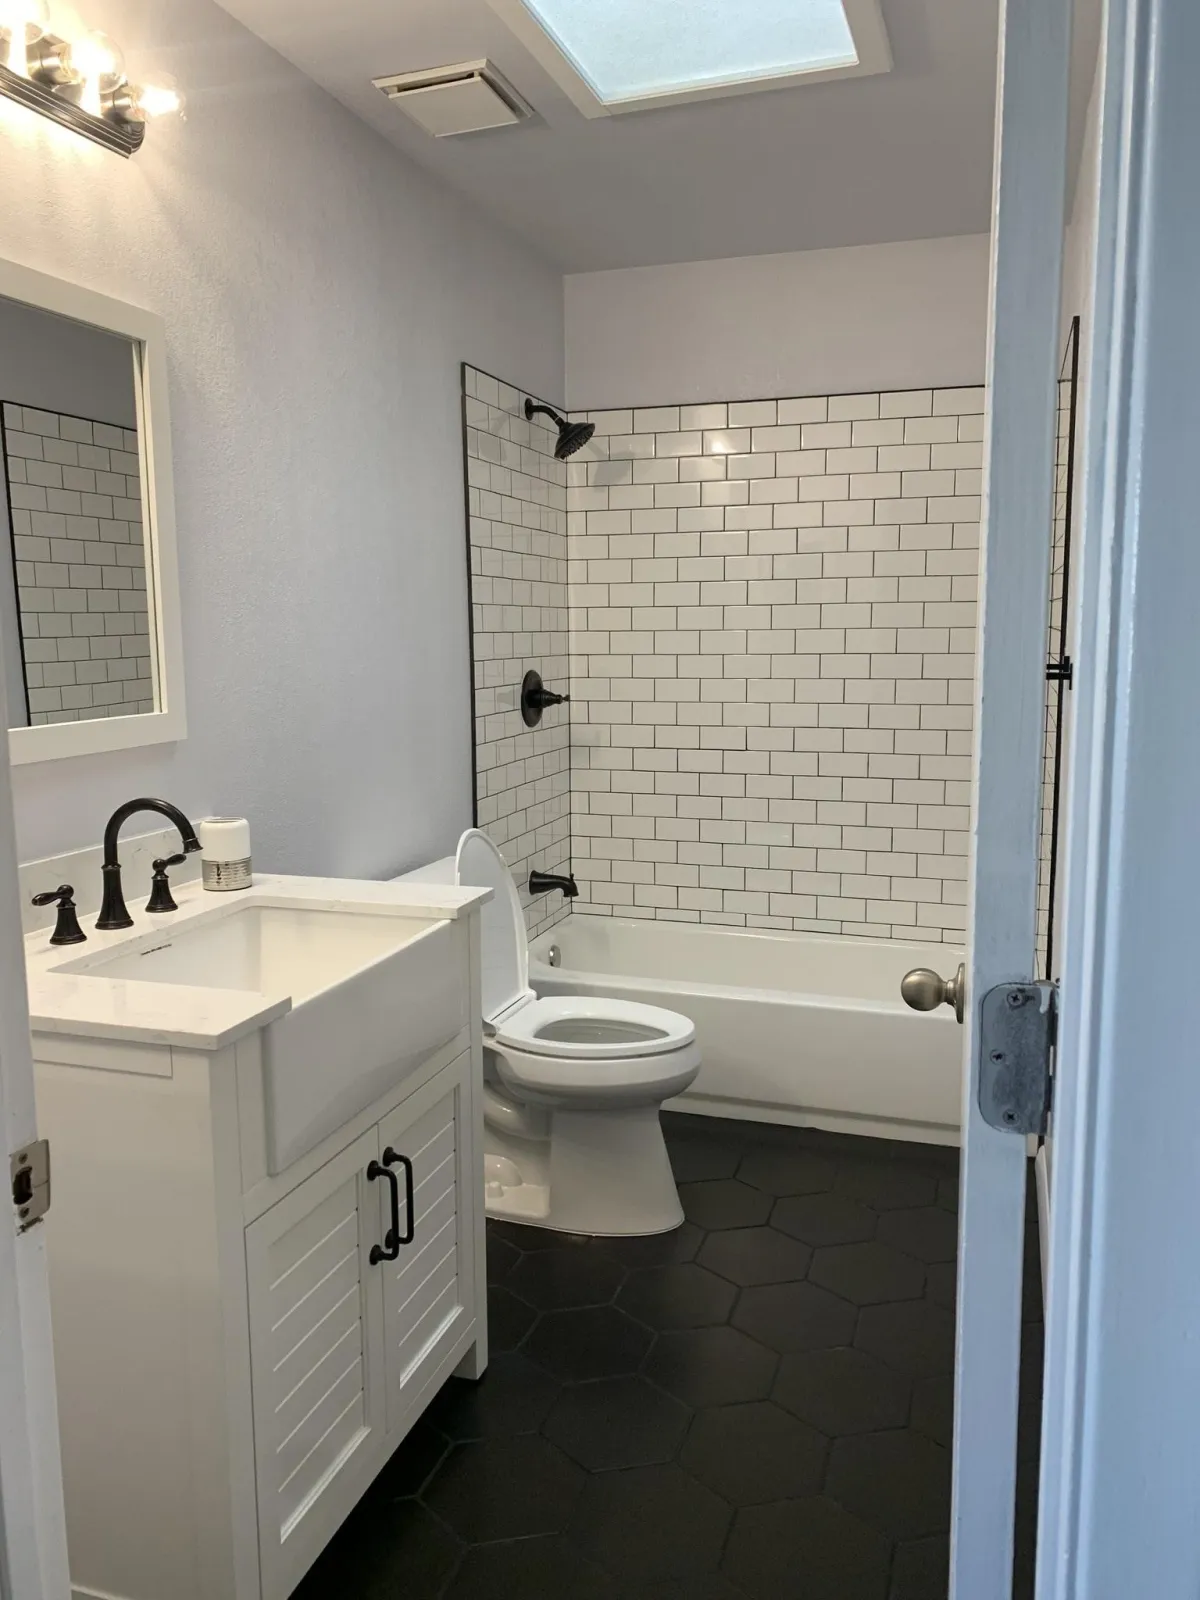 A modern bathroom with white subway tiles on walls